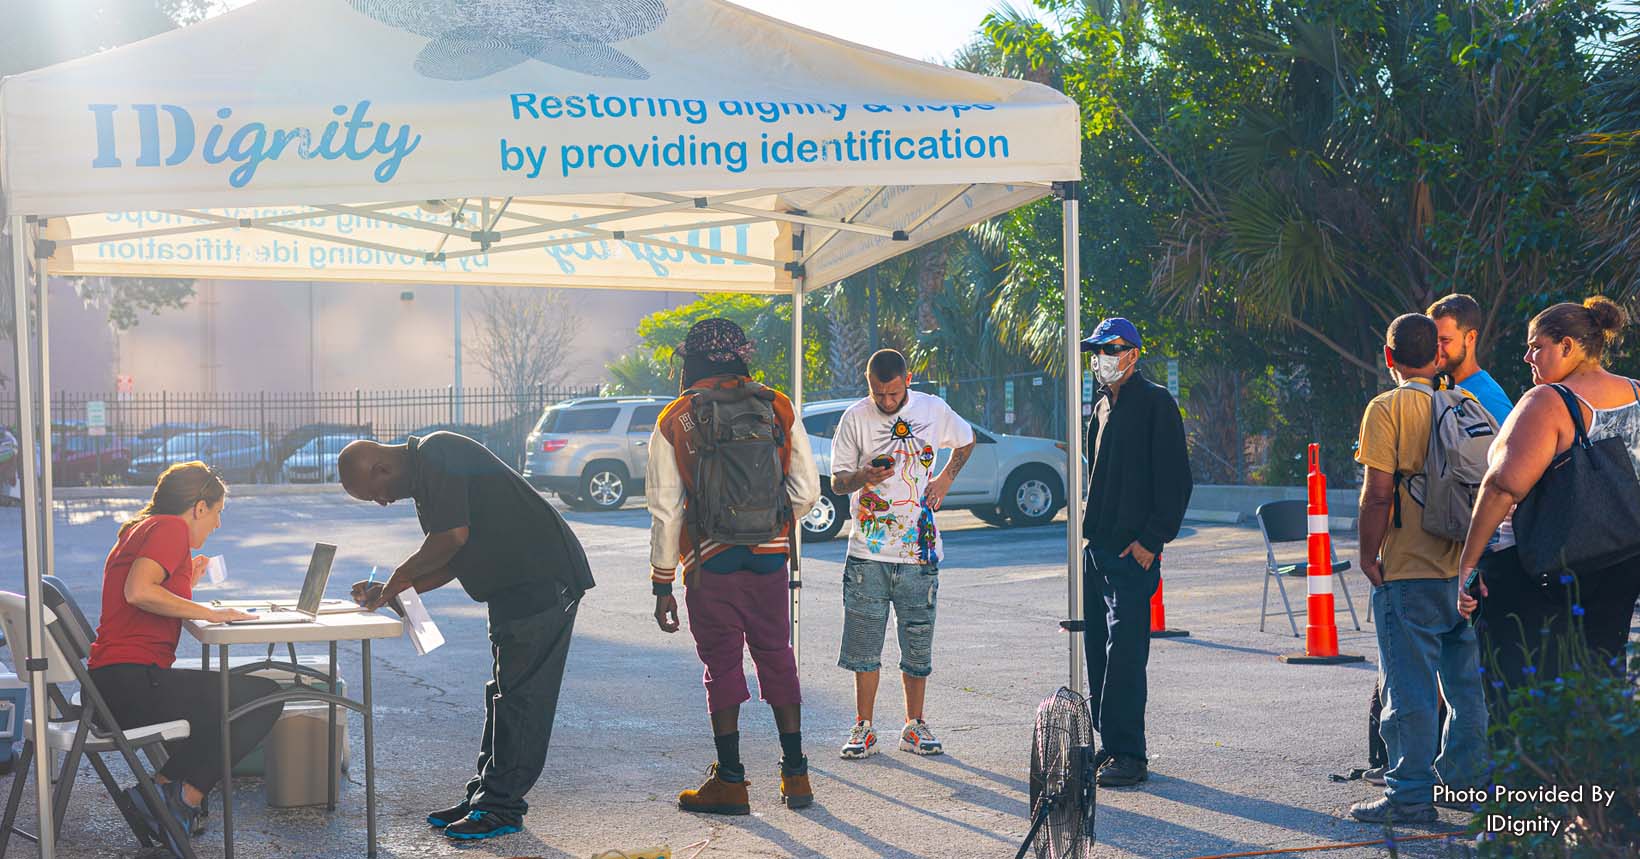 Clients from all walks of life wait their turn in check-in at IDignity’s Identification Service Days. Without their identification, these individuals are unable to participate in our modern society.